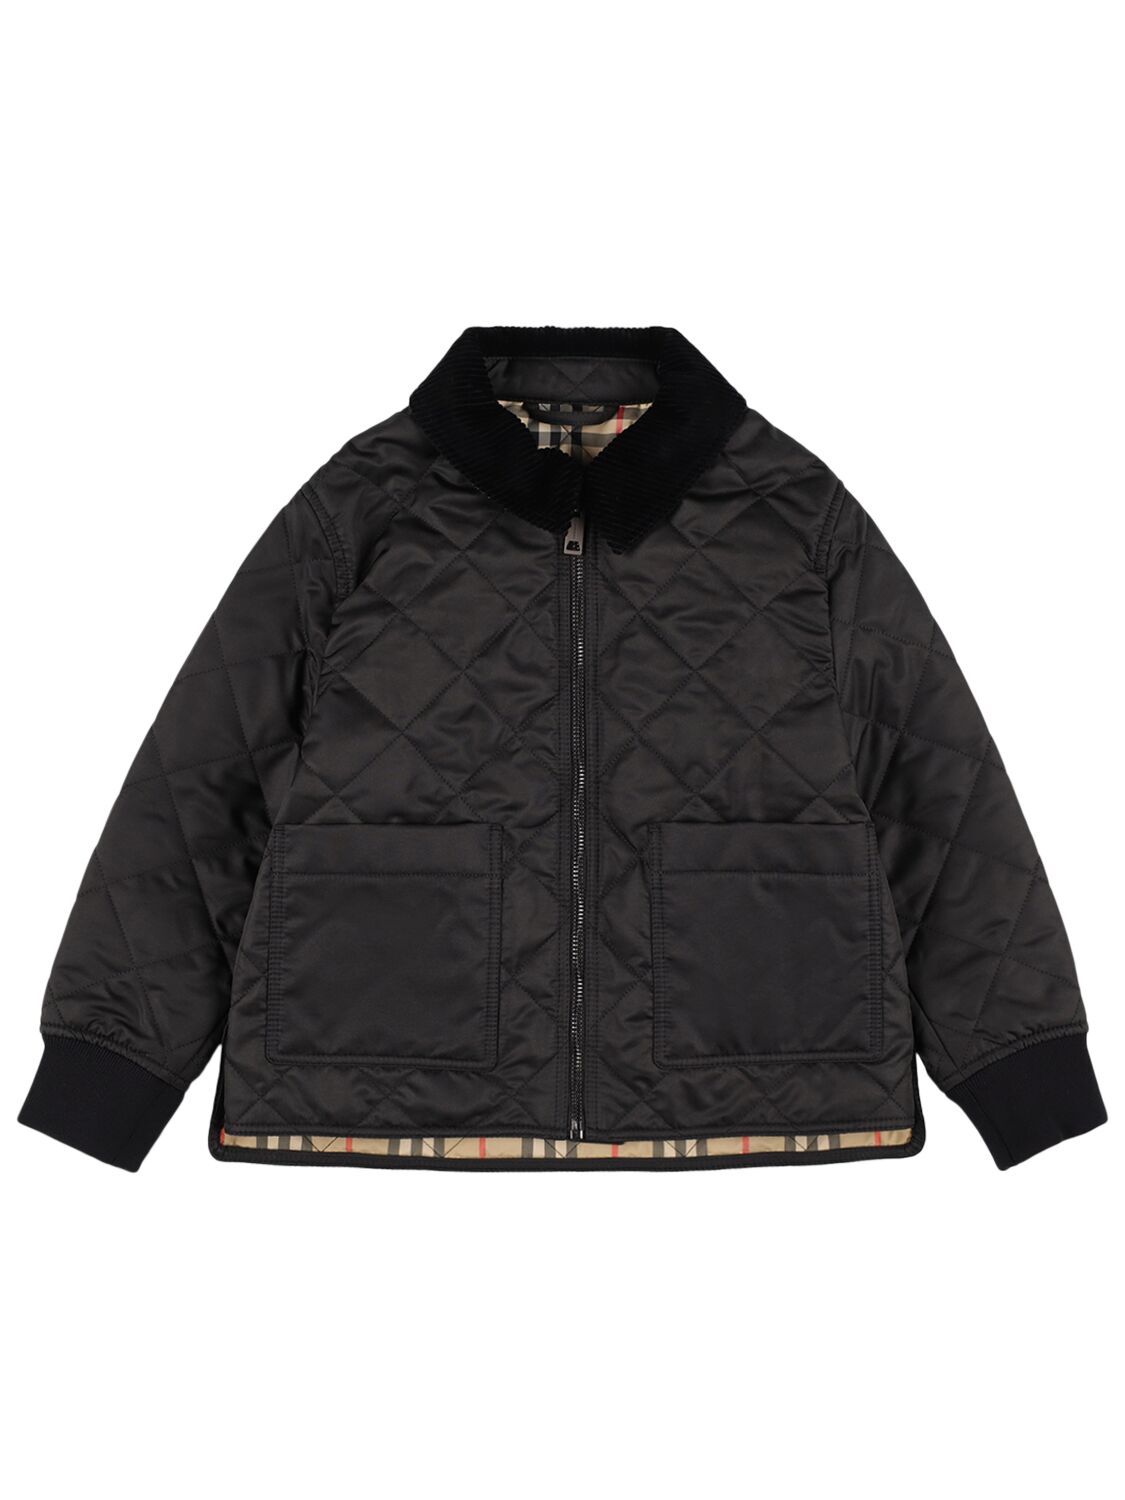 Burberry Kids' Quilted Nylon Jacket In Black